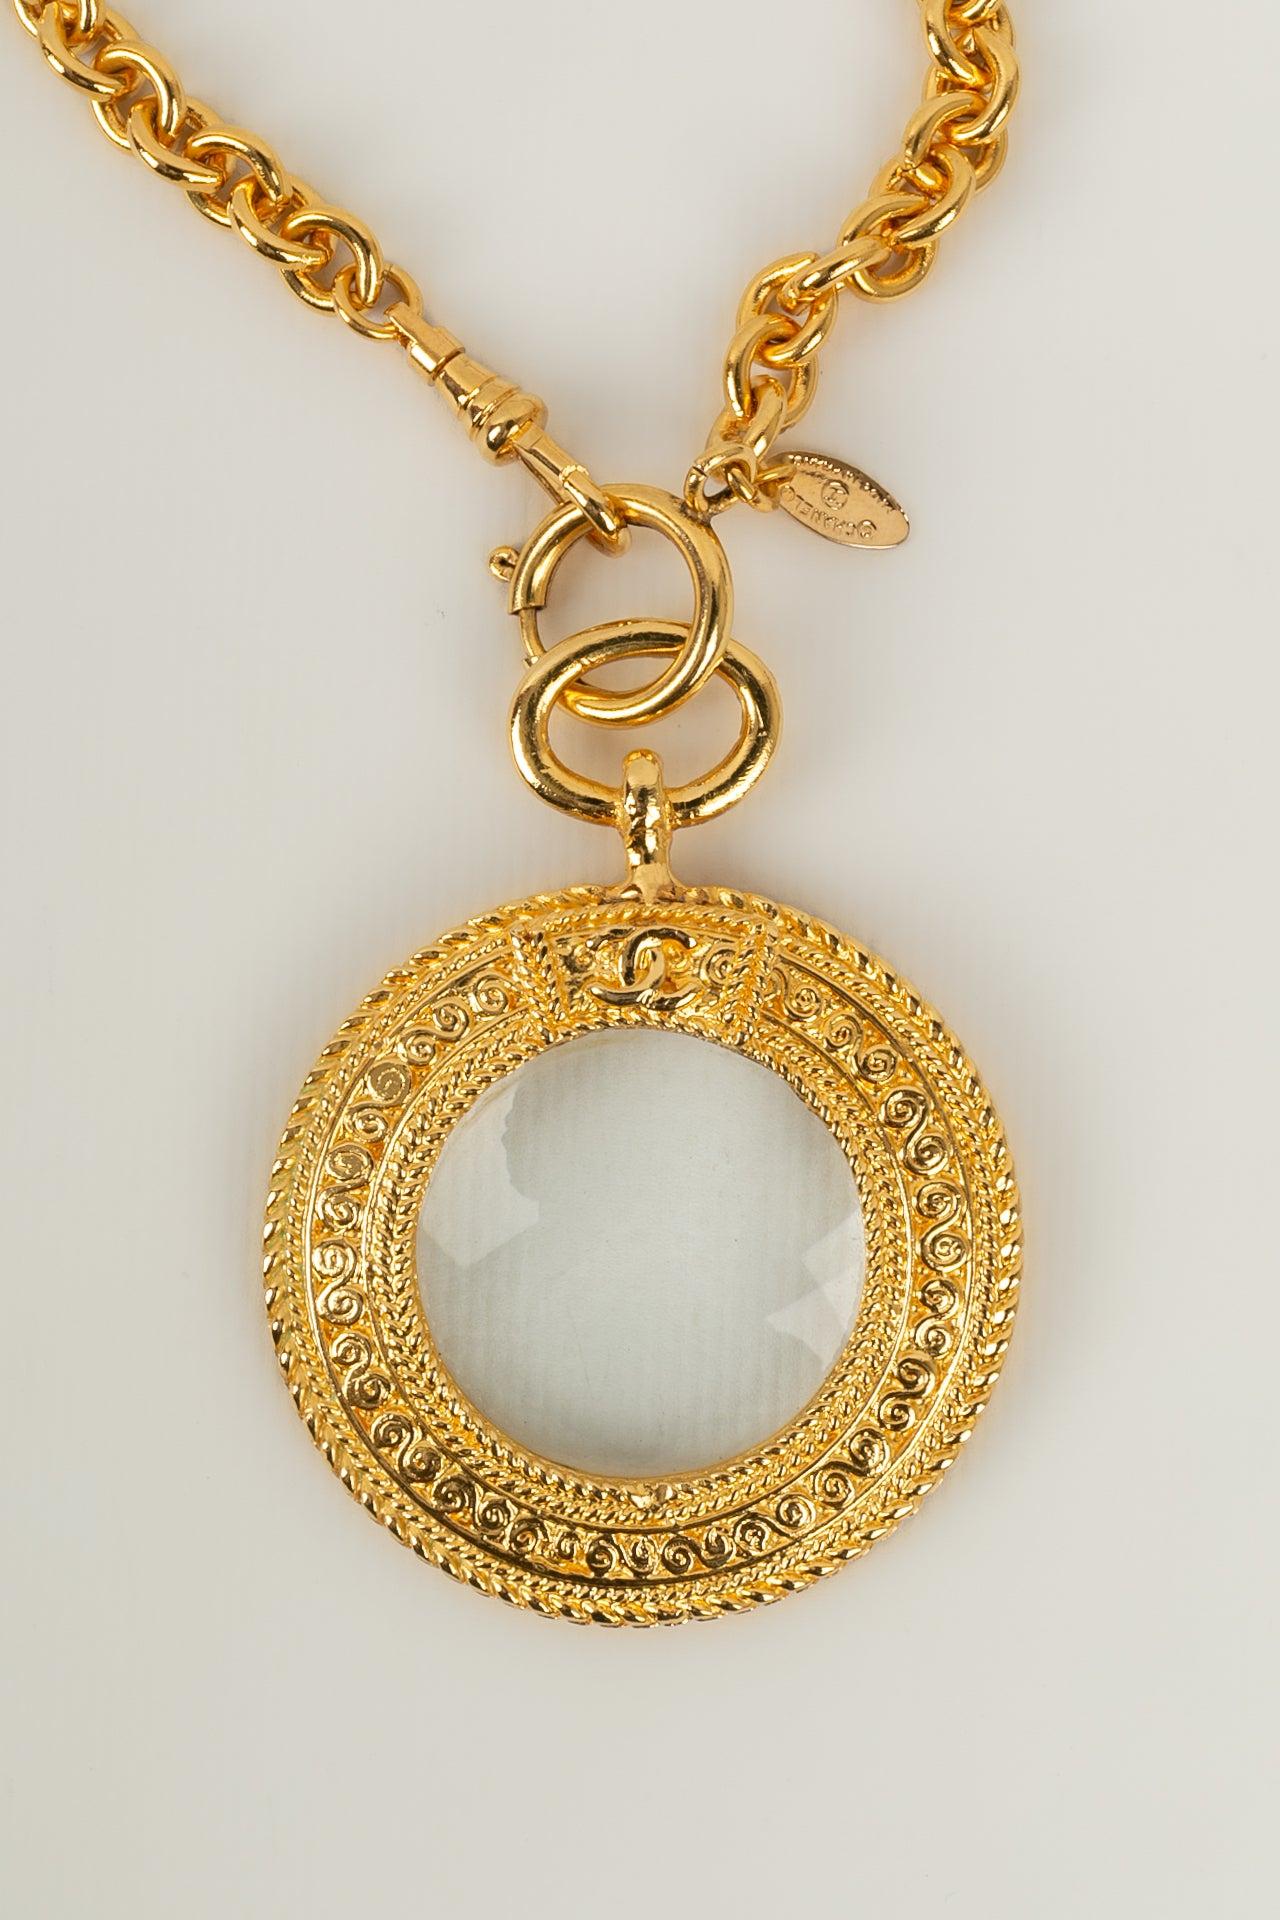 antique magnifying glass necklace